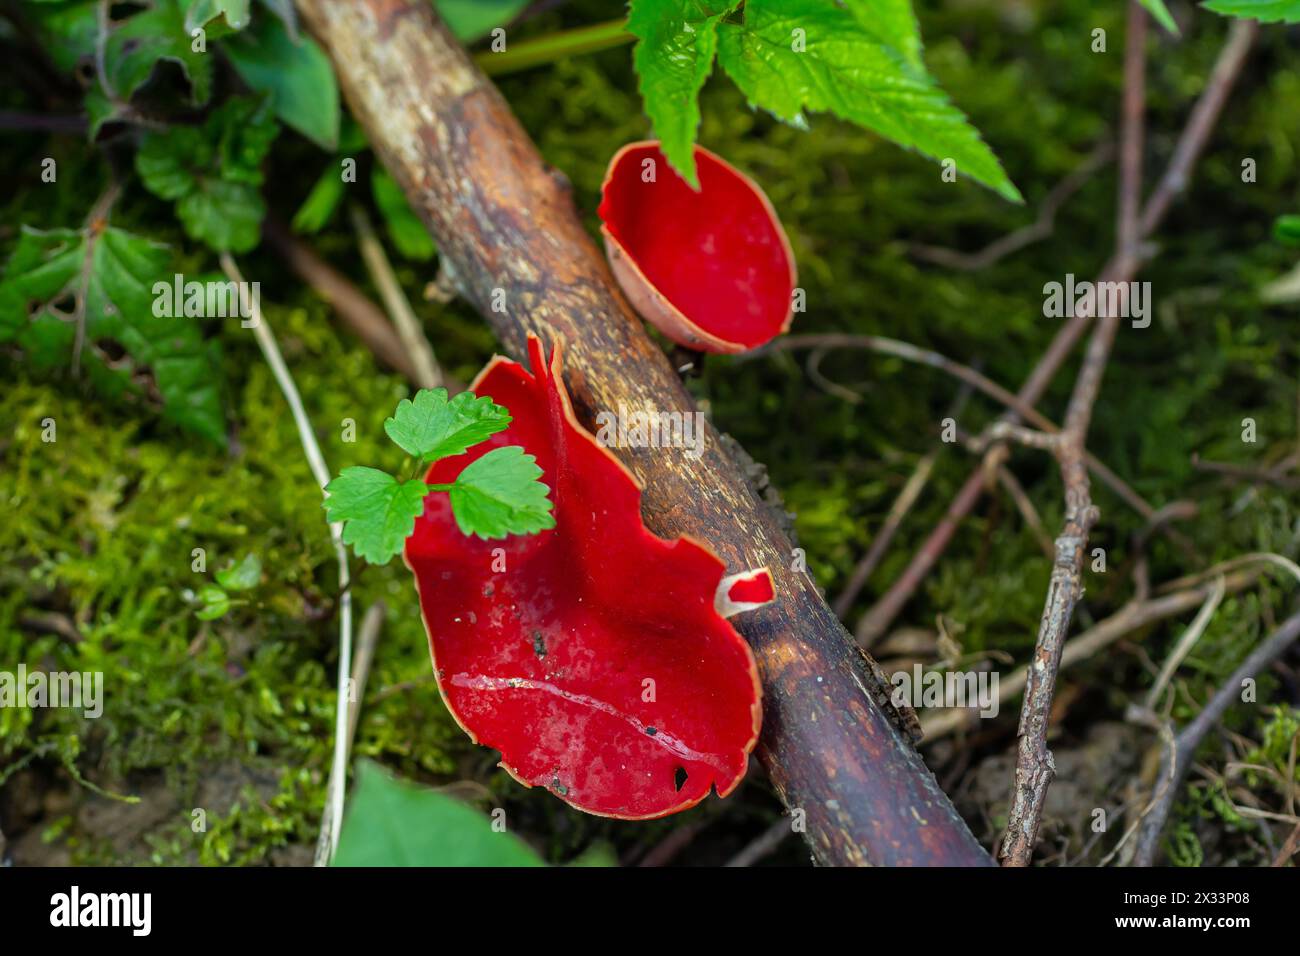 Spring edible red mushrooms Sarcoscypha grow in forest. close up. sarcoscypha austriaca or Sarcoscypha coccinea - mushrooms of early spring season, kn Stock Photo